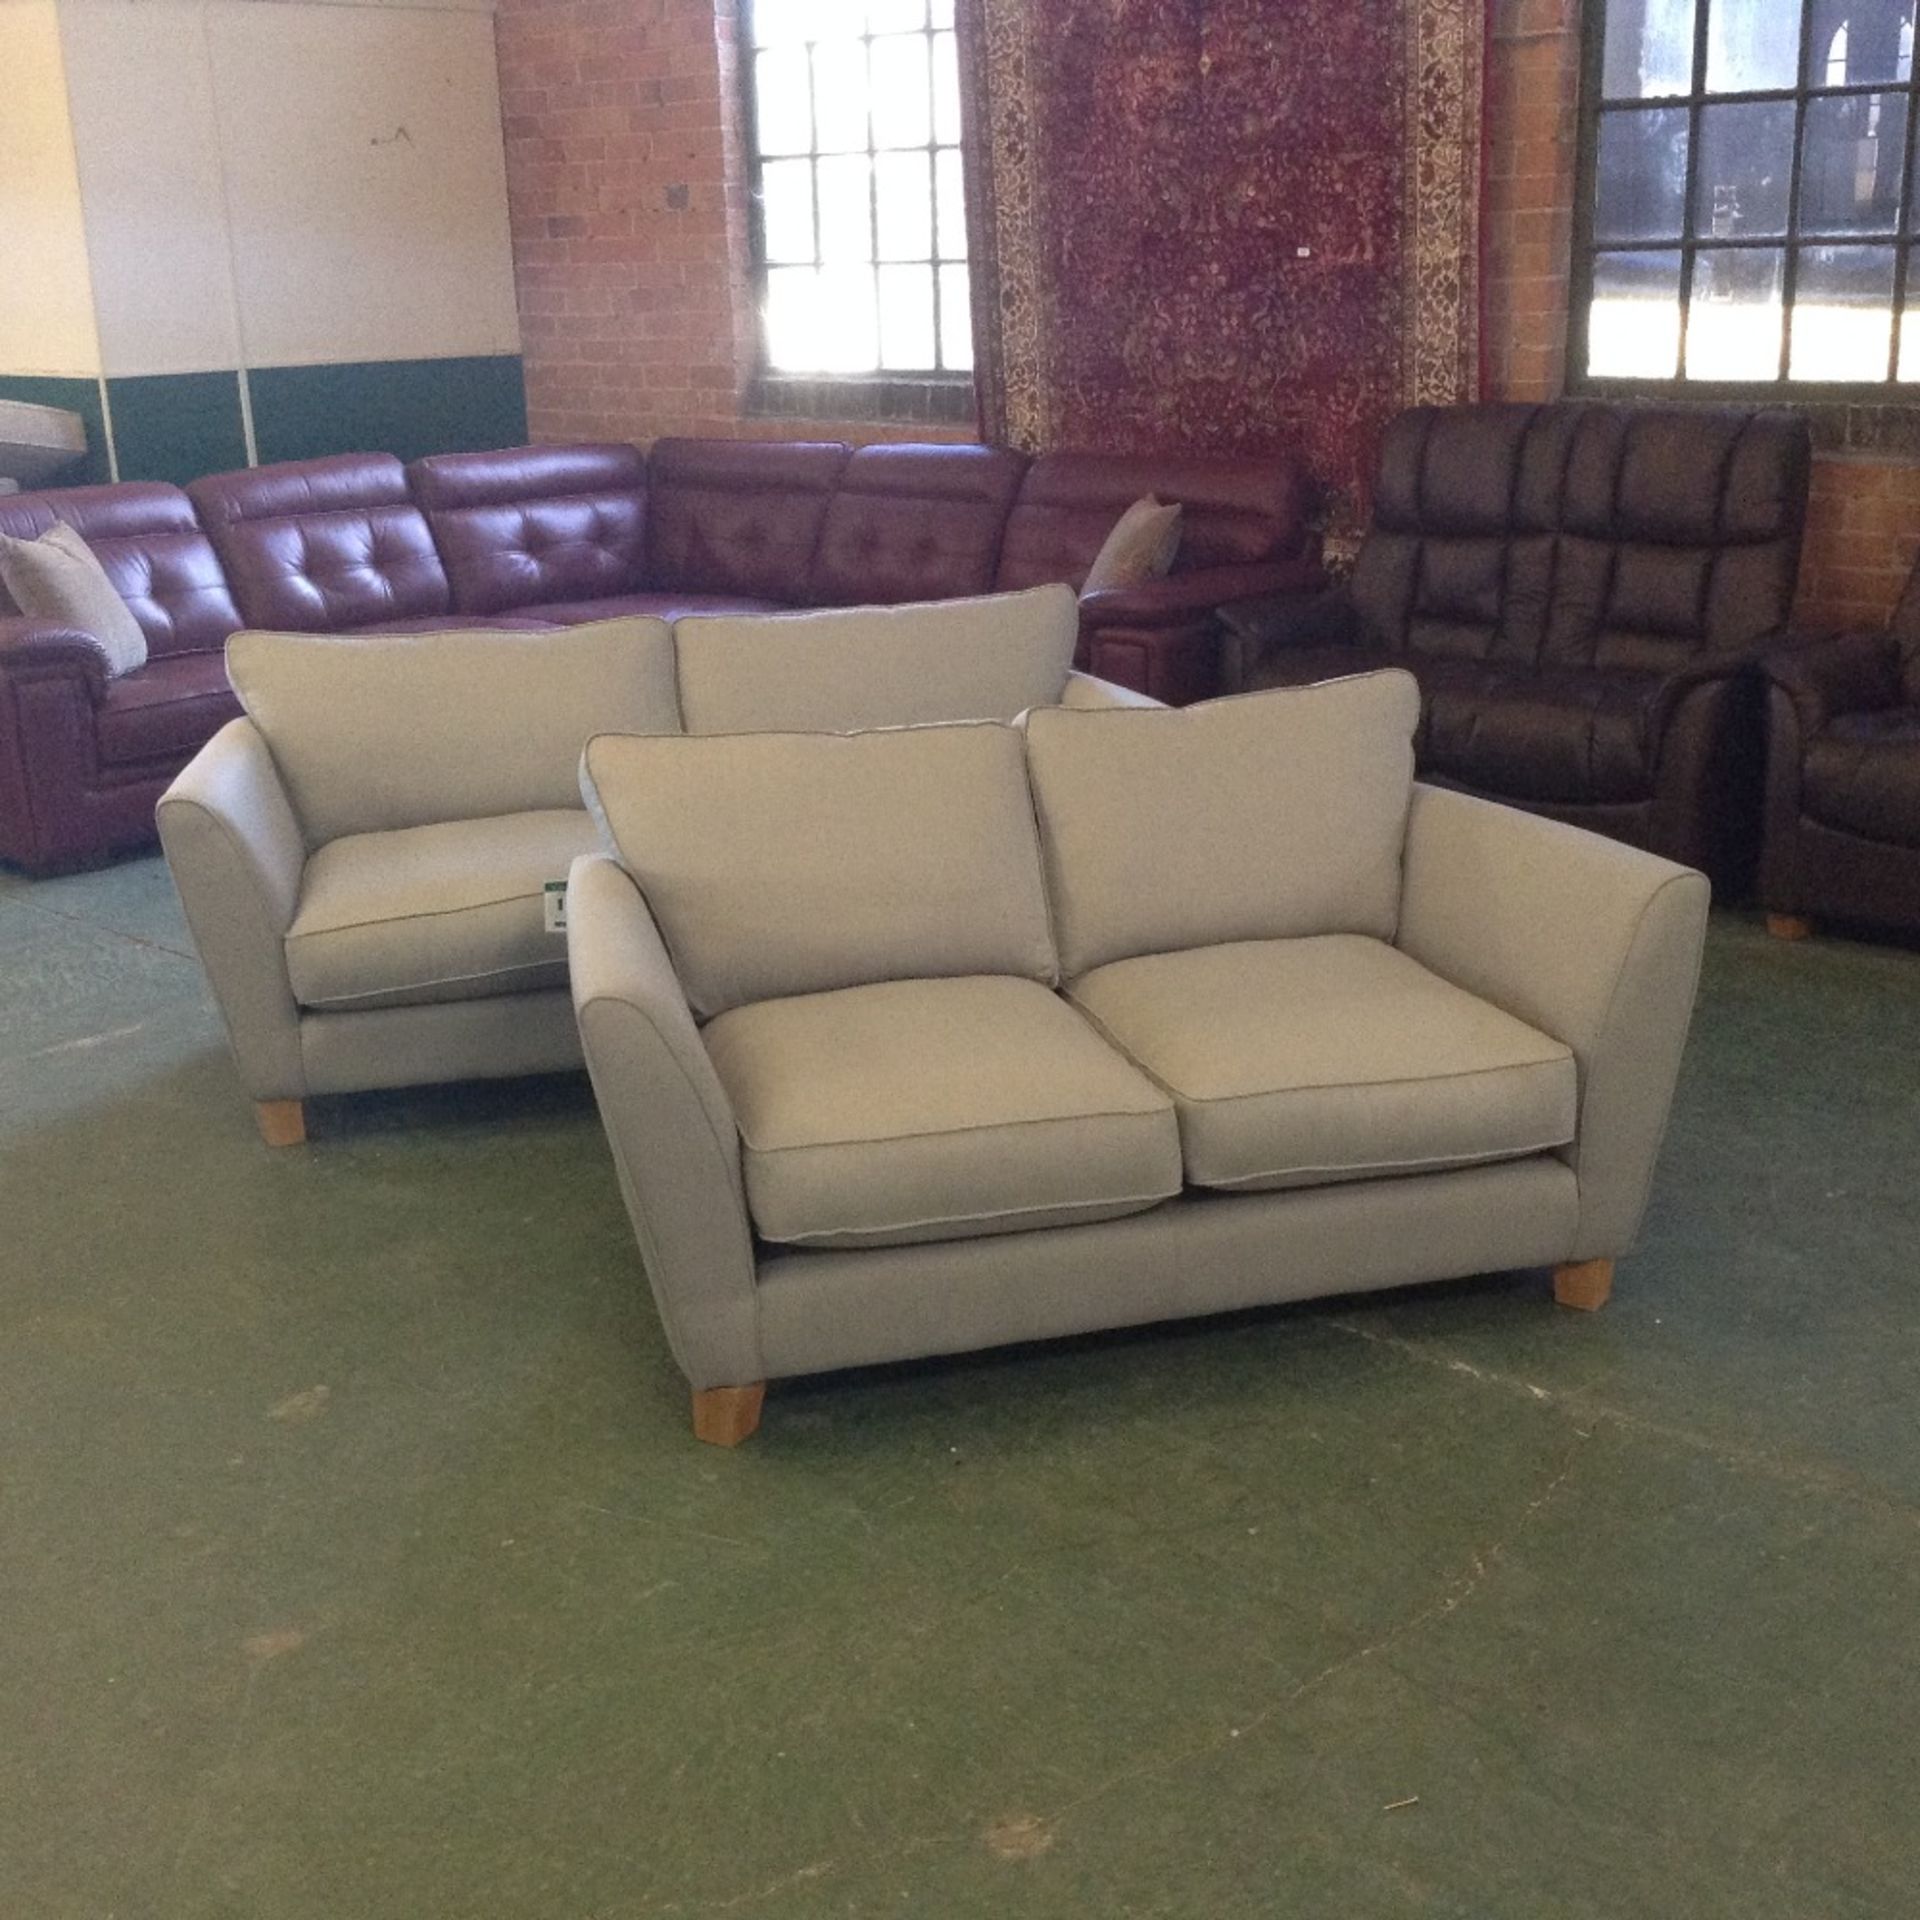 DUCK EGG BLUE 3 SEATER SOFA AND 2 SEATER SOFA